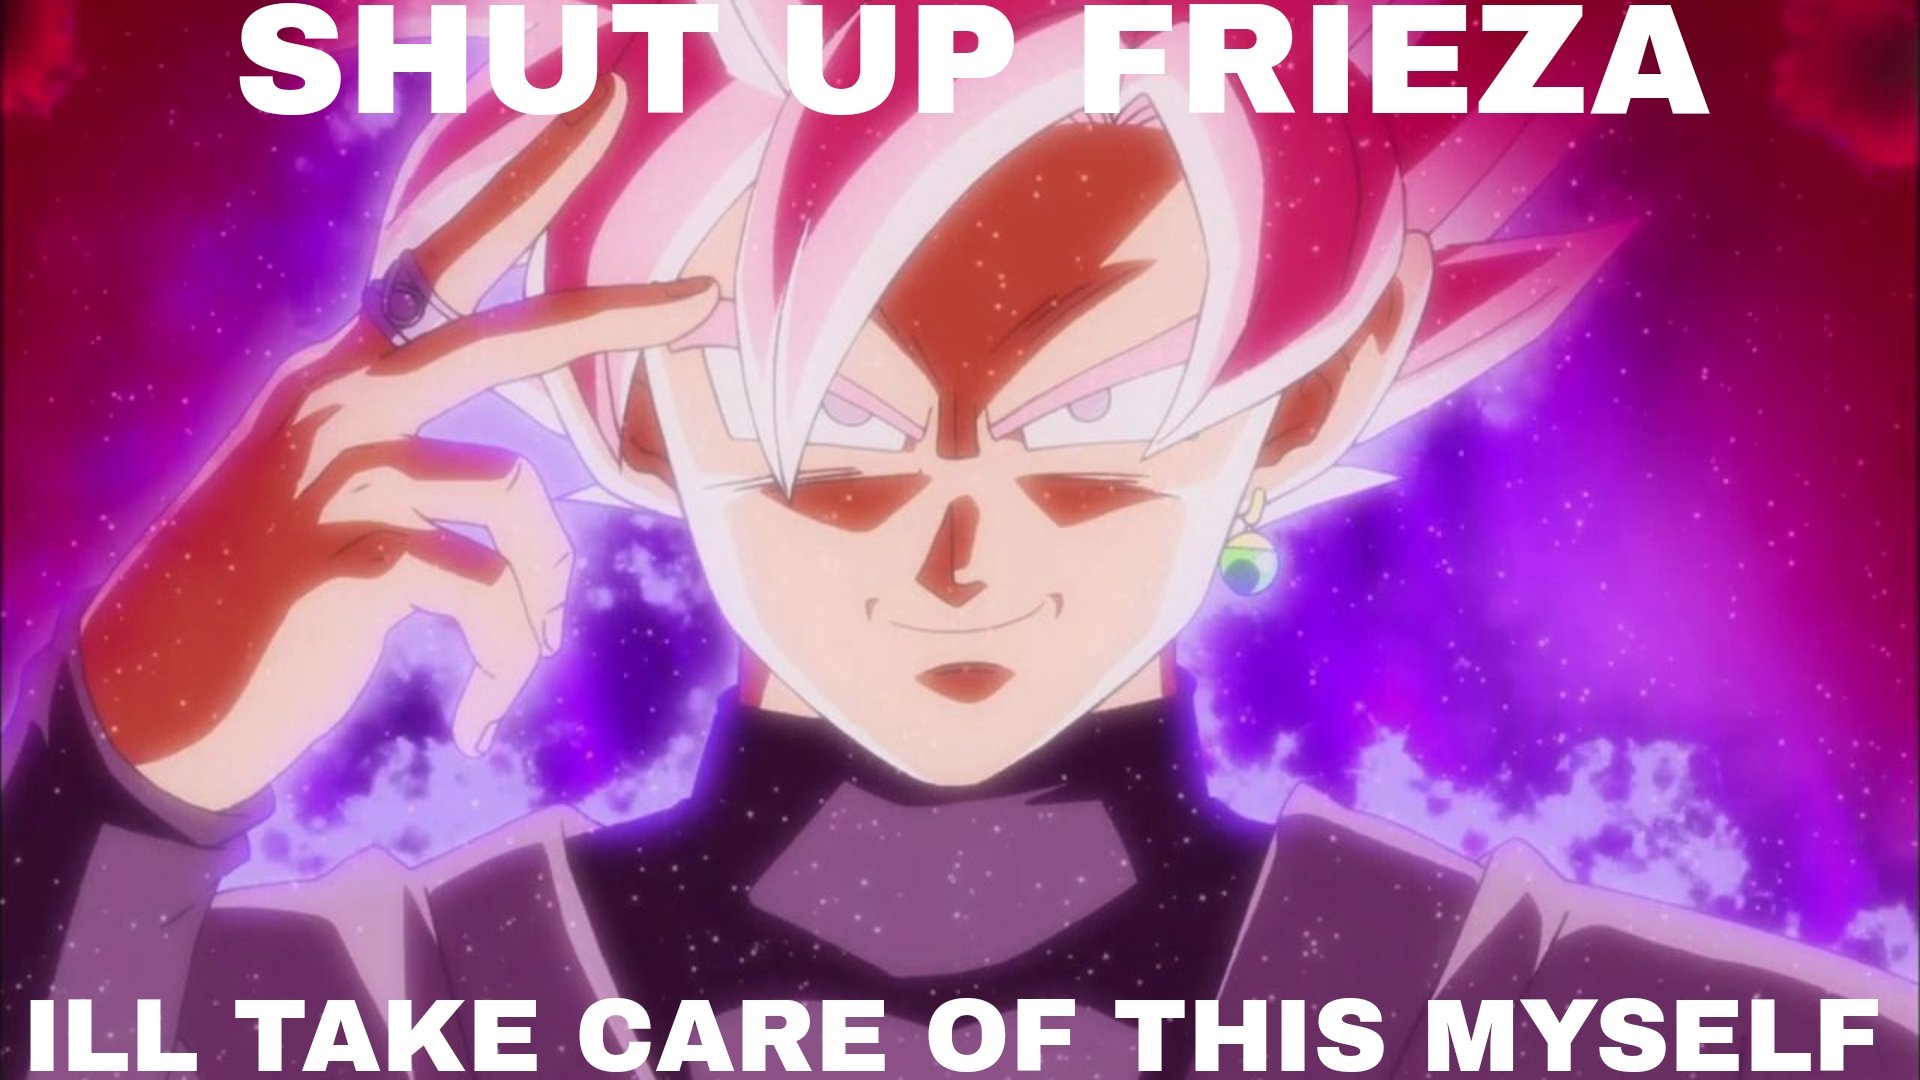 High Quality Shut up frieza, I'll take care of this myself Blank Meme Template